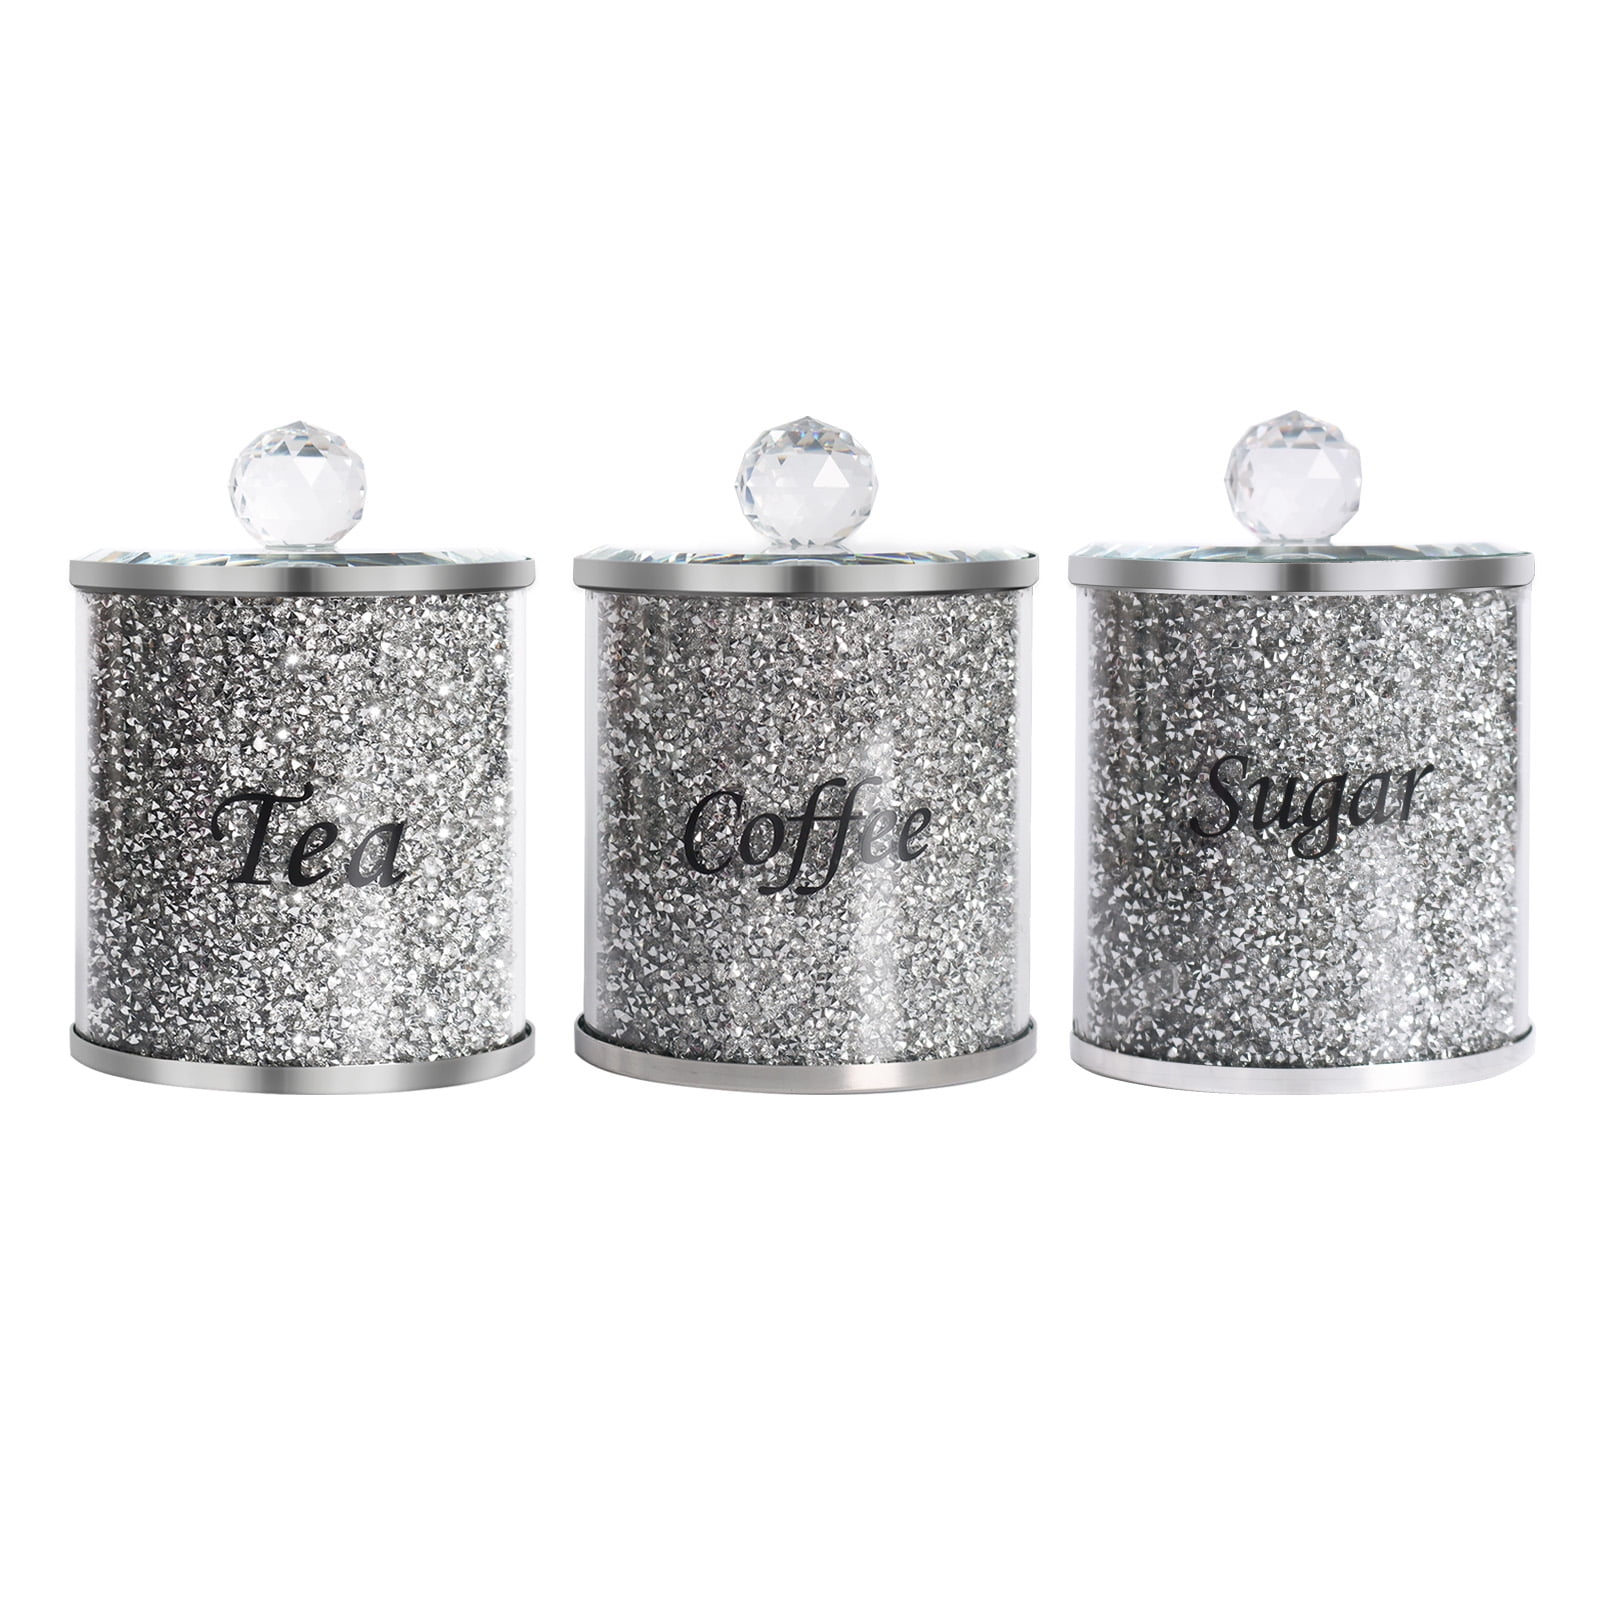 DAYYET Teal Canisters for Kitchen Counter, Airtight Kitchen Canisters for  Countertop, Flour and Sugar Containers, Tea Coffee Sugar Canister Set